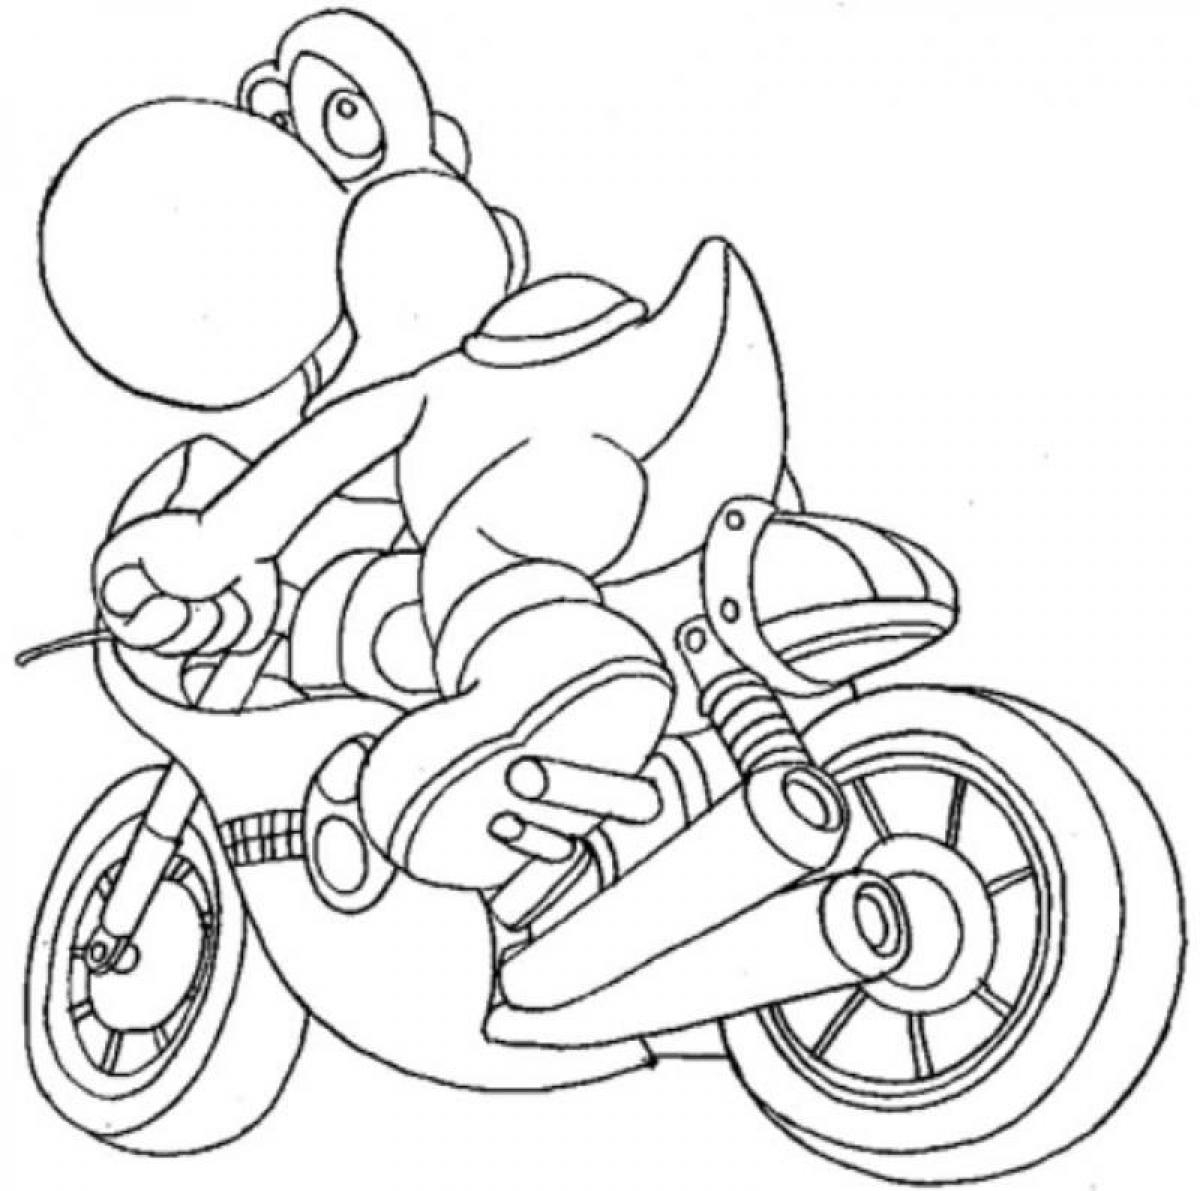 Yoshi Coloring Pages To Print Yoshi Coloring Pages Riding Motorcycle Coloringstar